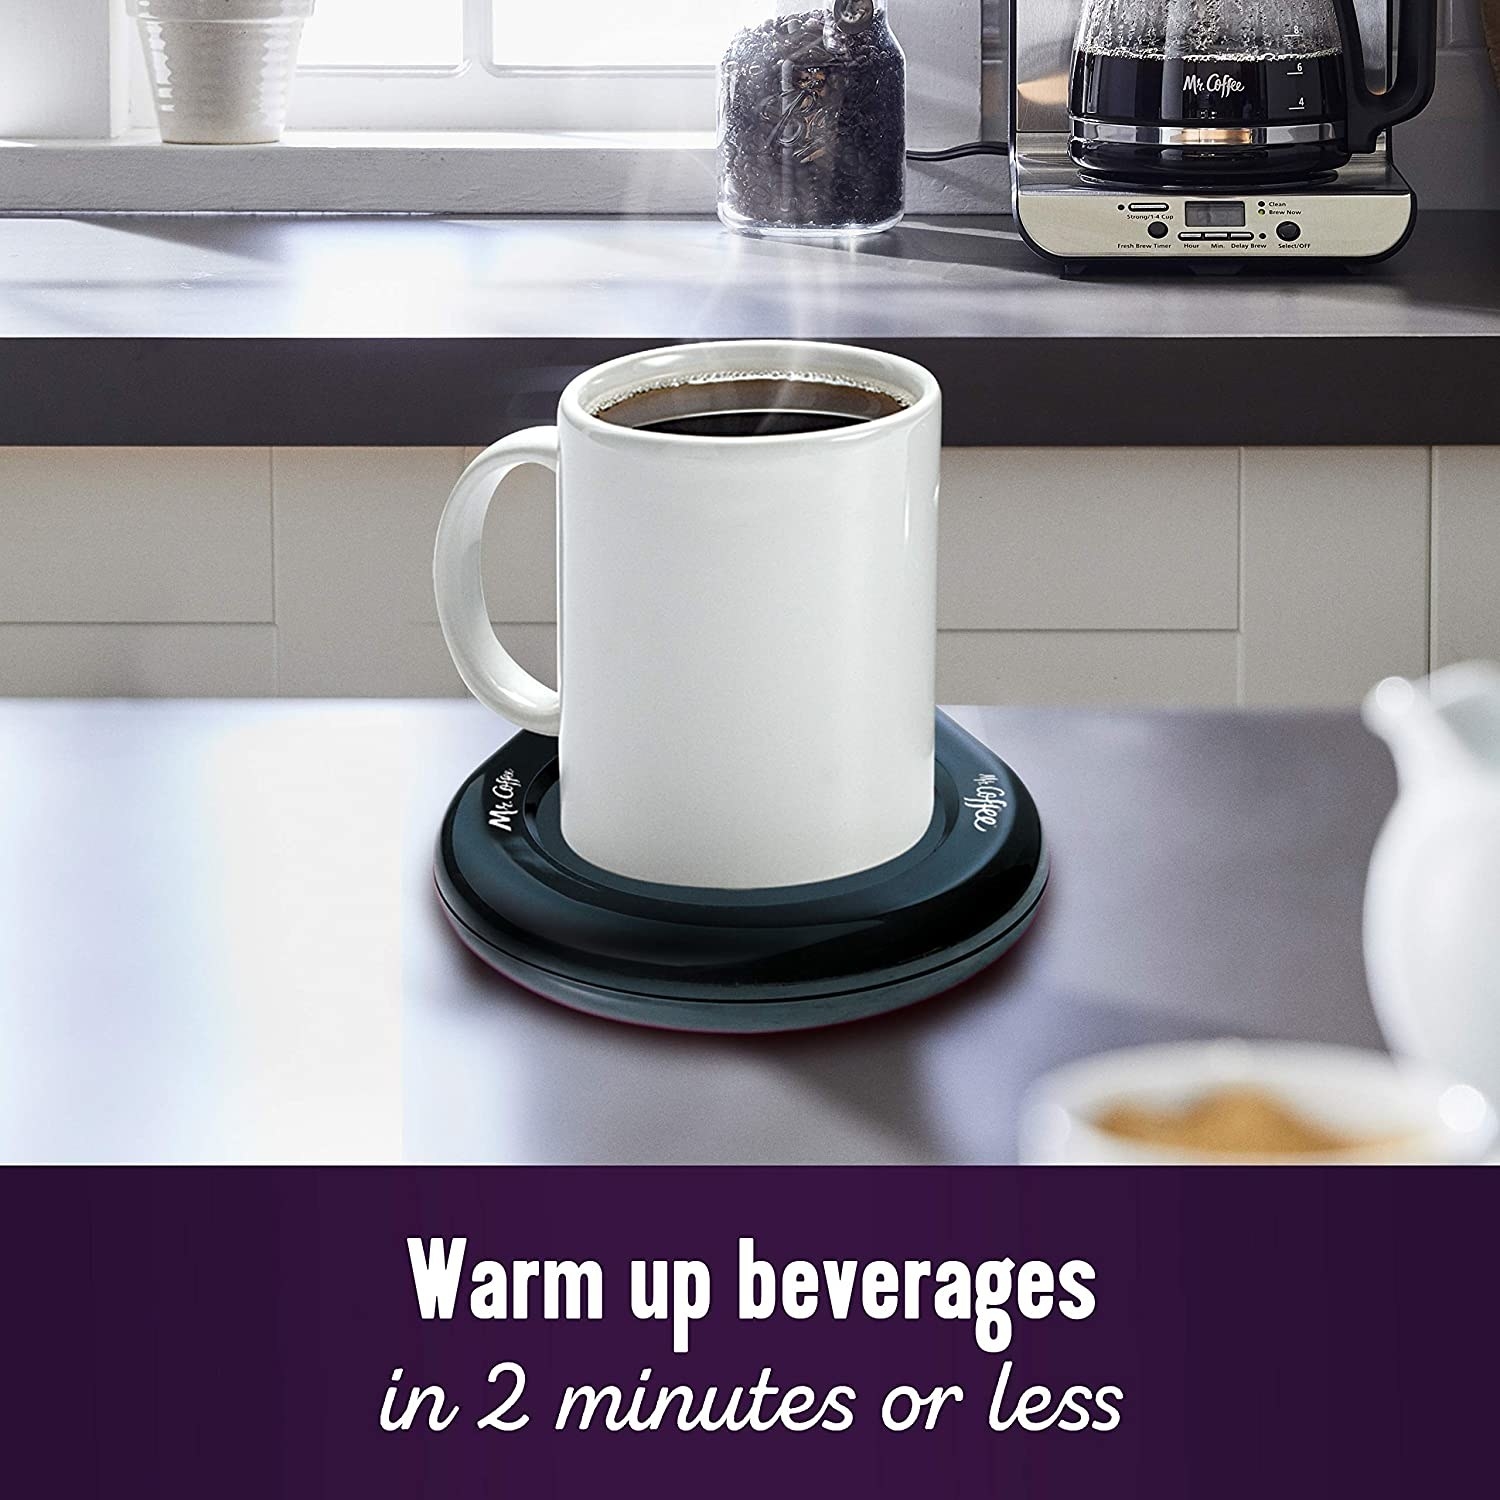 A cup of coffee on the beverage warmer.